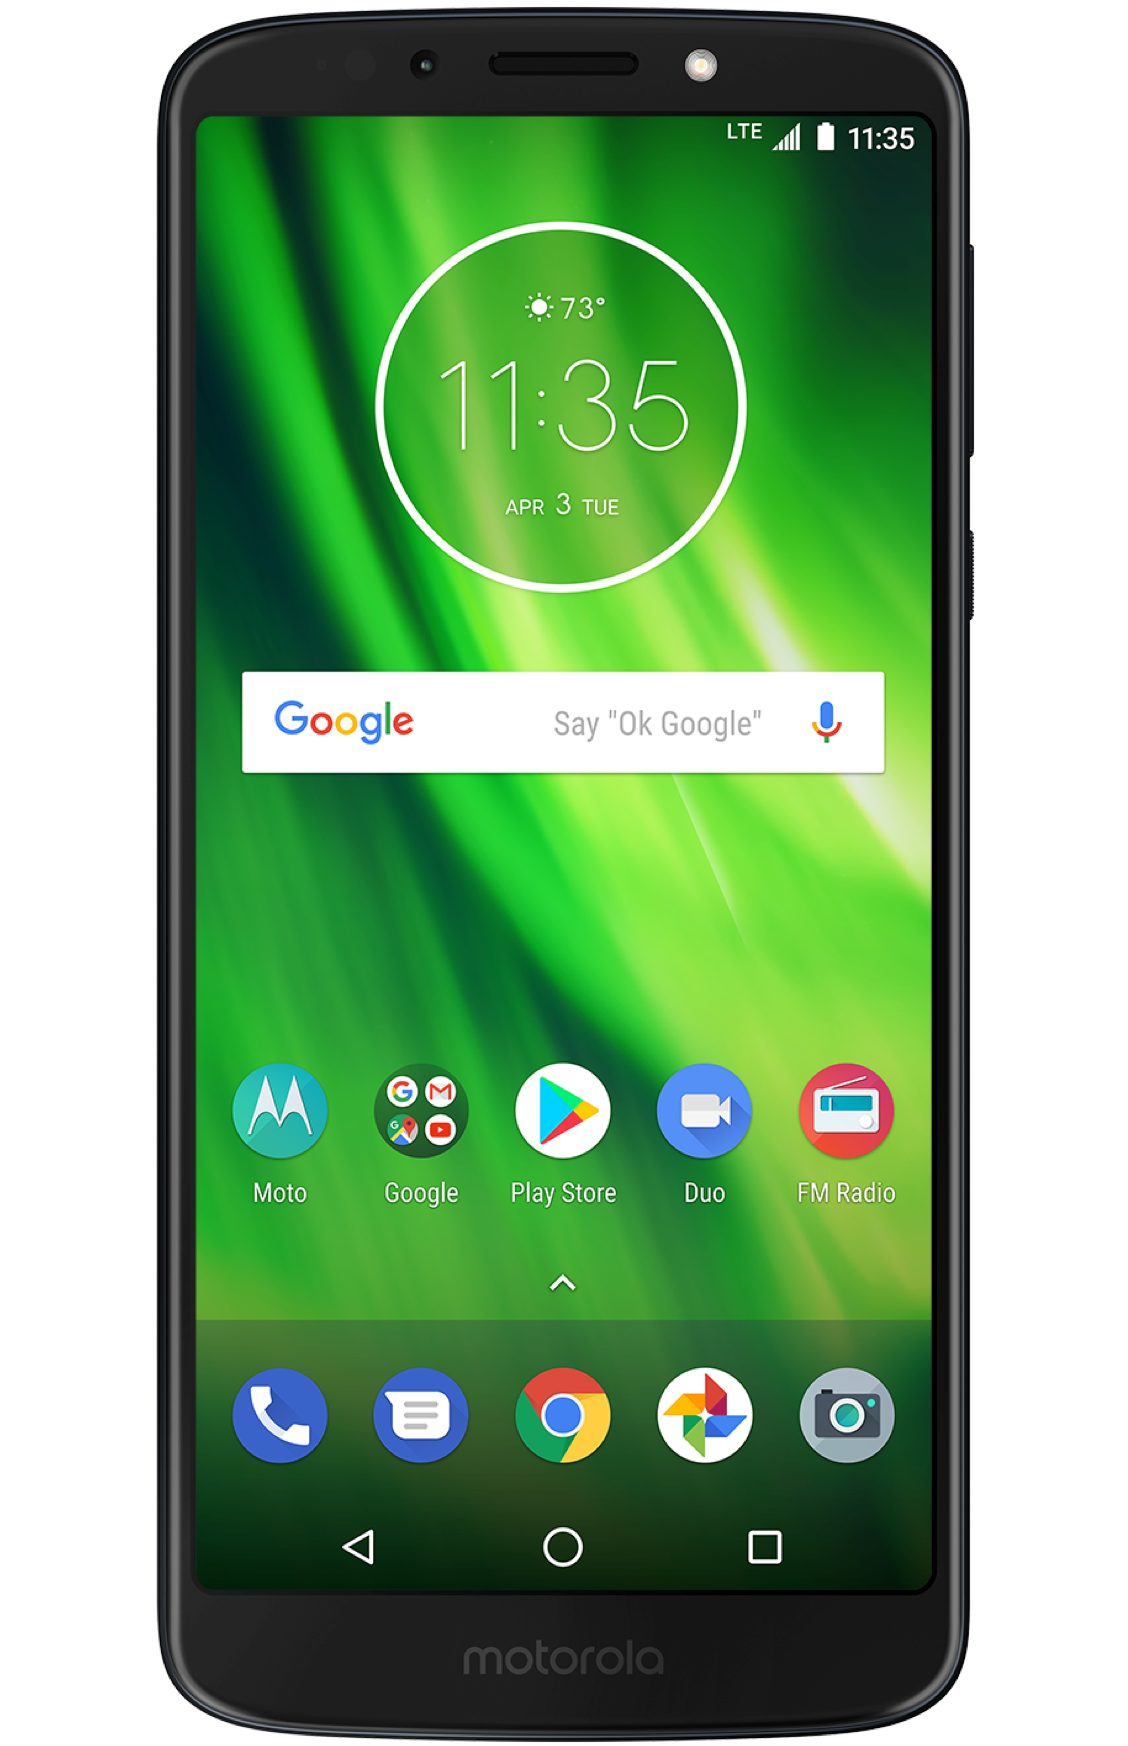 Get the Moto G6 Play for $80 at Boost Mobile!